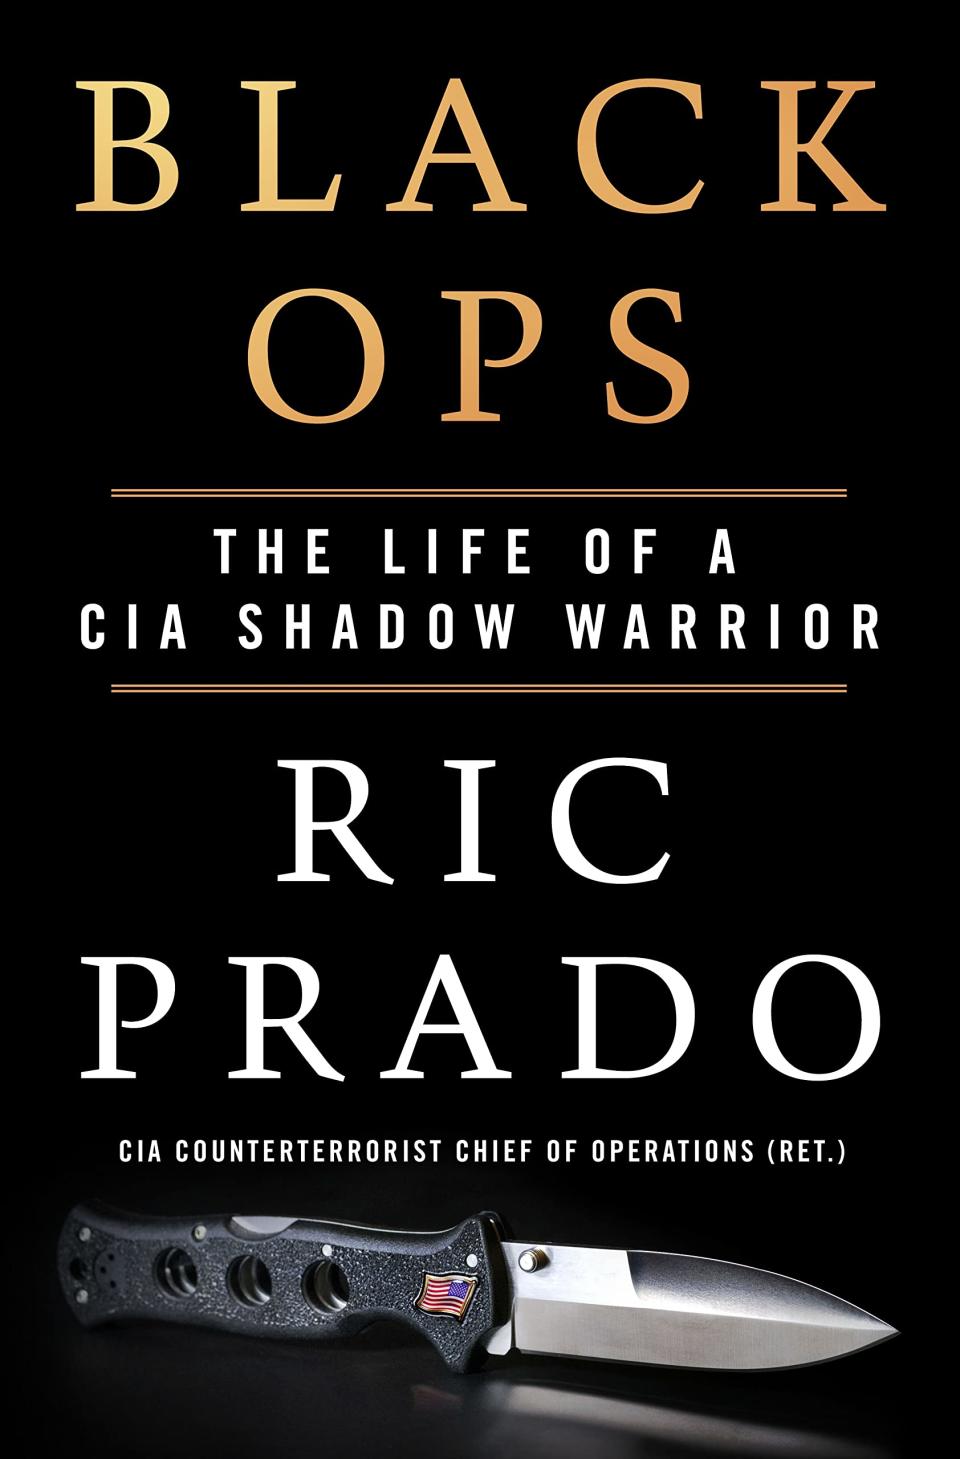 Ric Prado, a former CIA operative and the agency's highest-ranking officer, presents his memoir, "Black Ops," during a virtual event hosted by The BookMark on March 14.